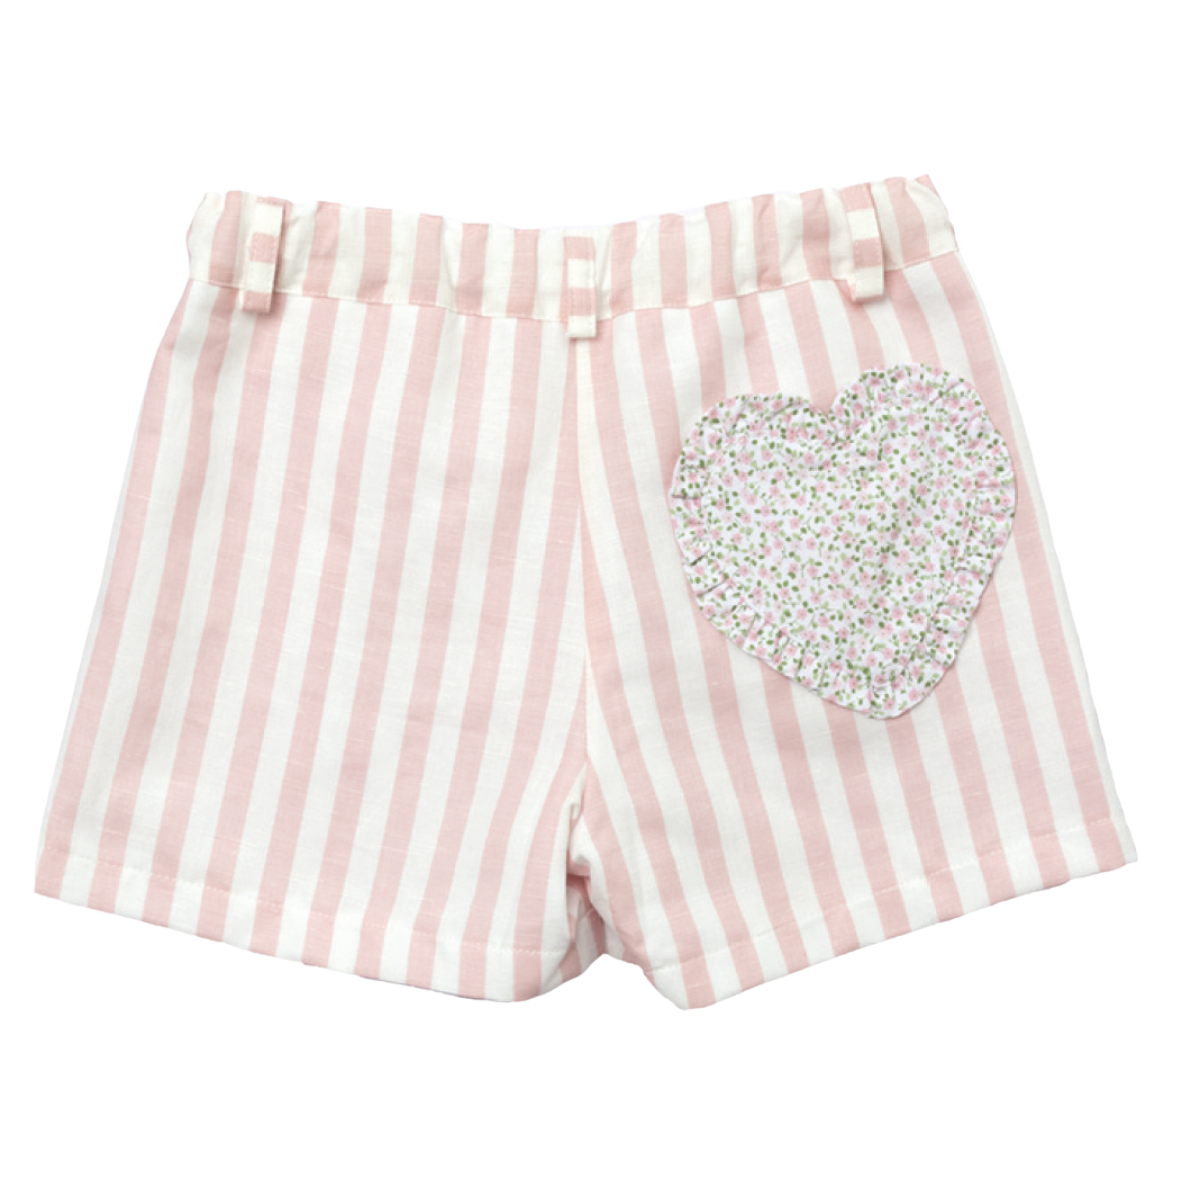 Pink and white striped shorts with floral heart pocket by Sal and PImenta. 